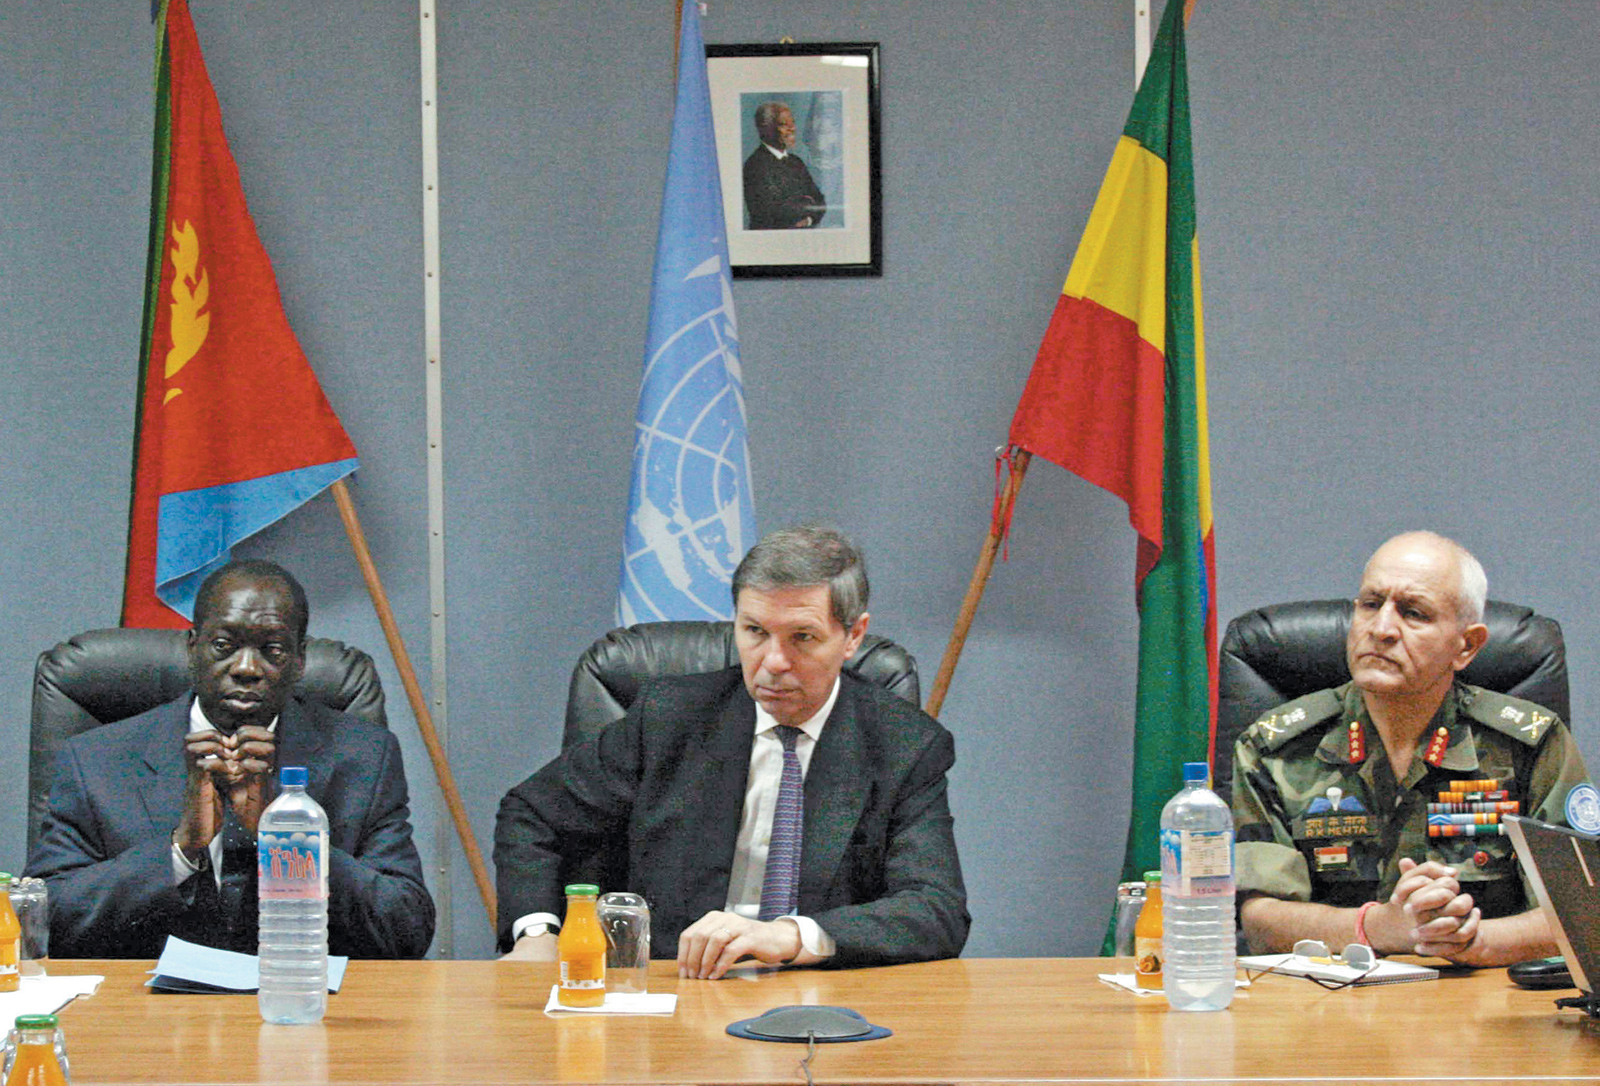 Jean-Marie Guéhenno (center), then the UN’s undersecretary-general for peacekeeping operations, at a meeting at the UN Mission in Ethiopia and Eritrea, with deputy special representative Joël Adechi and military adviser Major-General Randhir Kumar Mehta, Asmara, Eritrea, December 2005